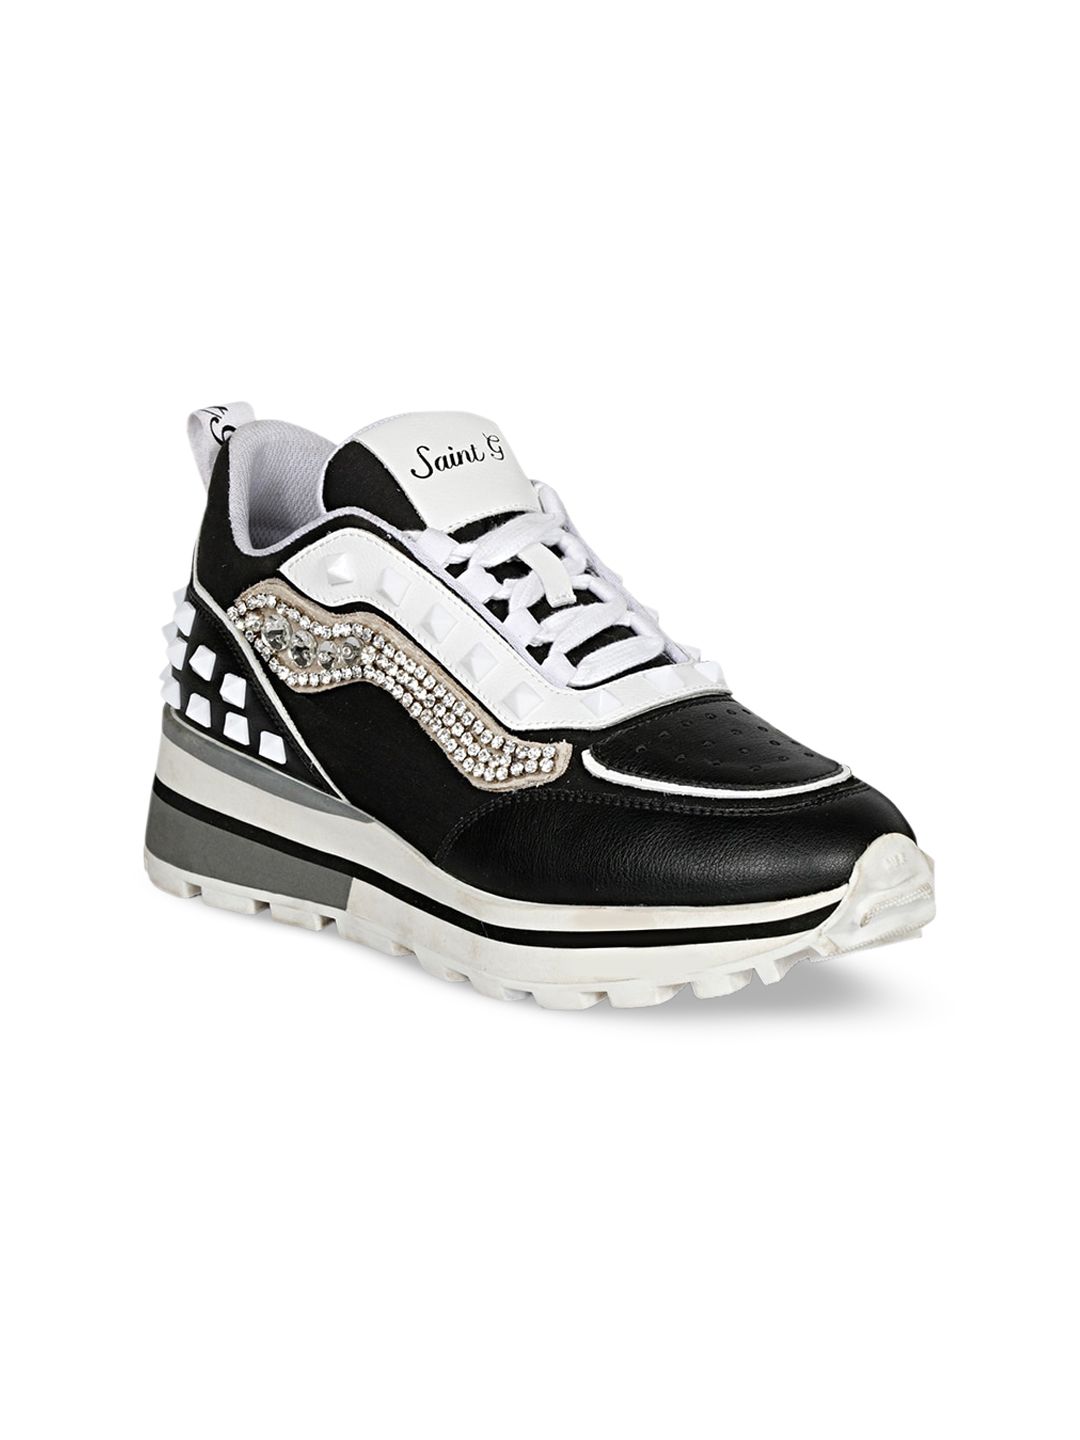 Saint G Women Leather Sneakers Price in India